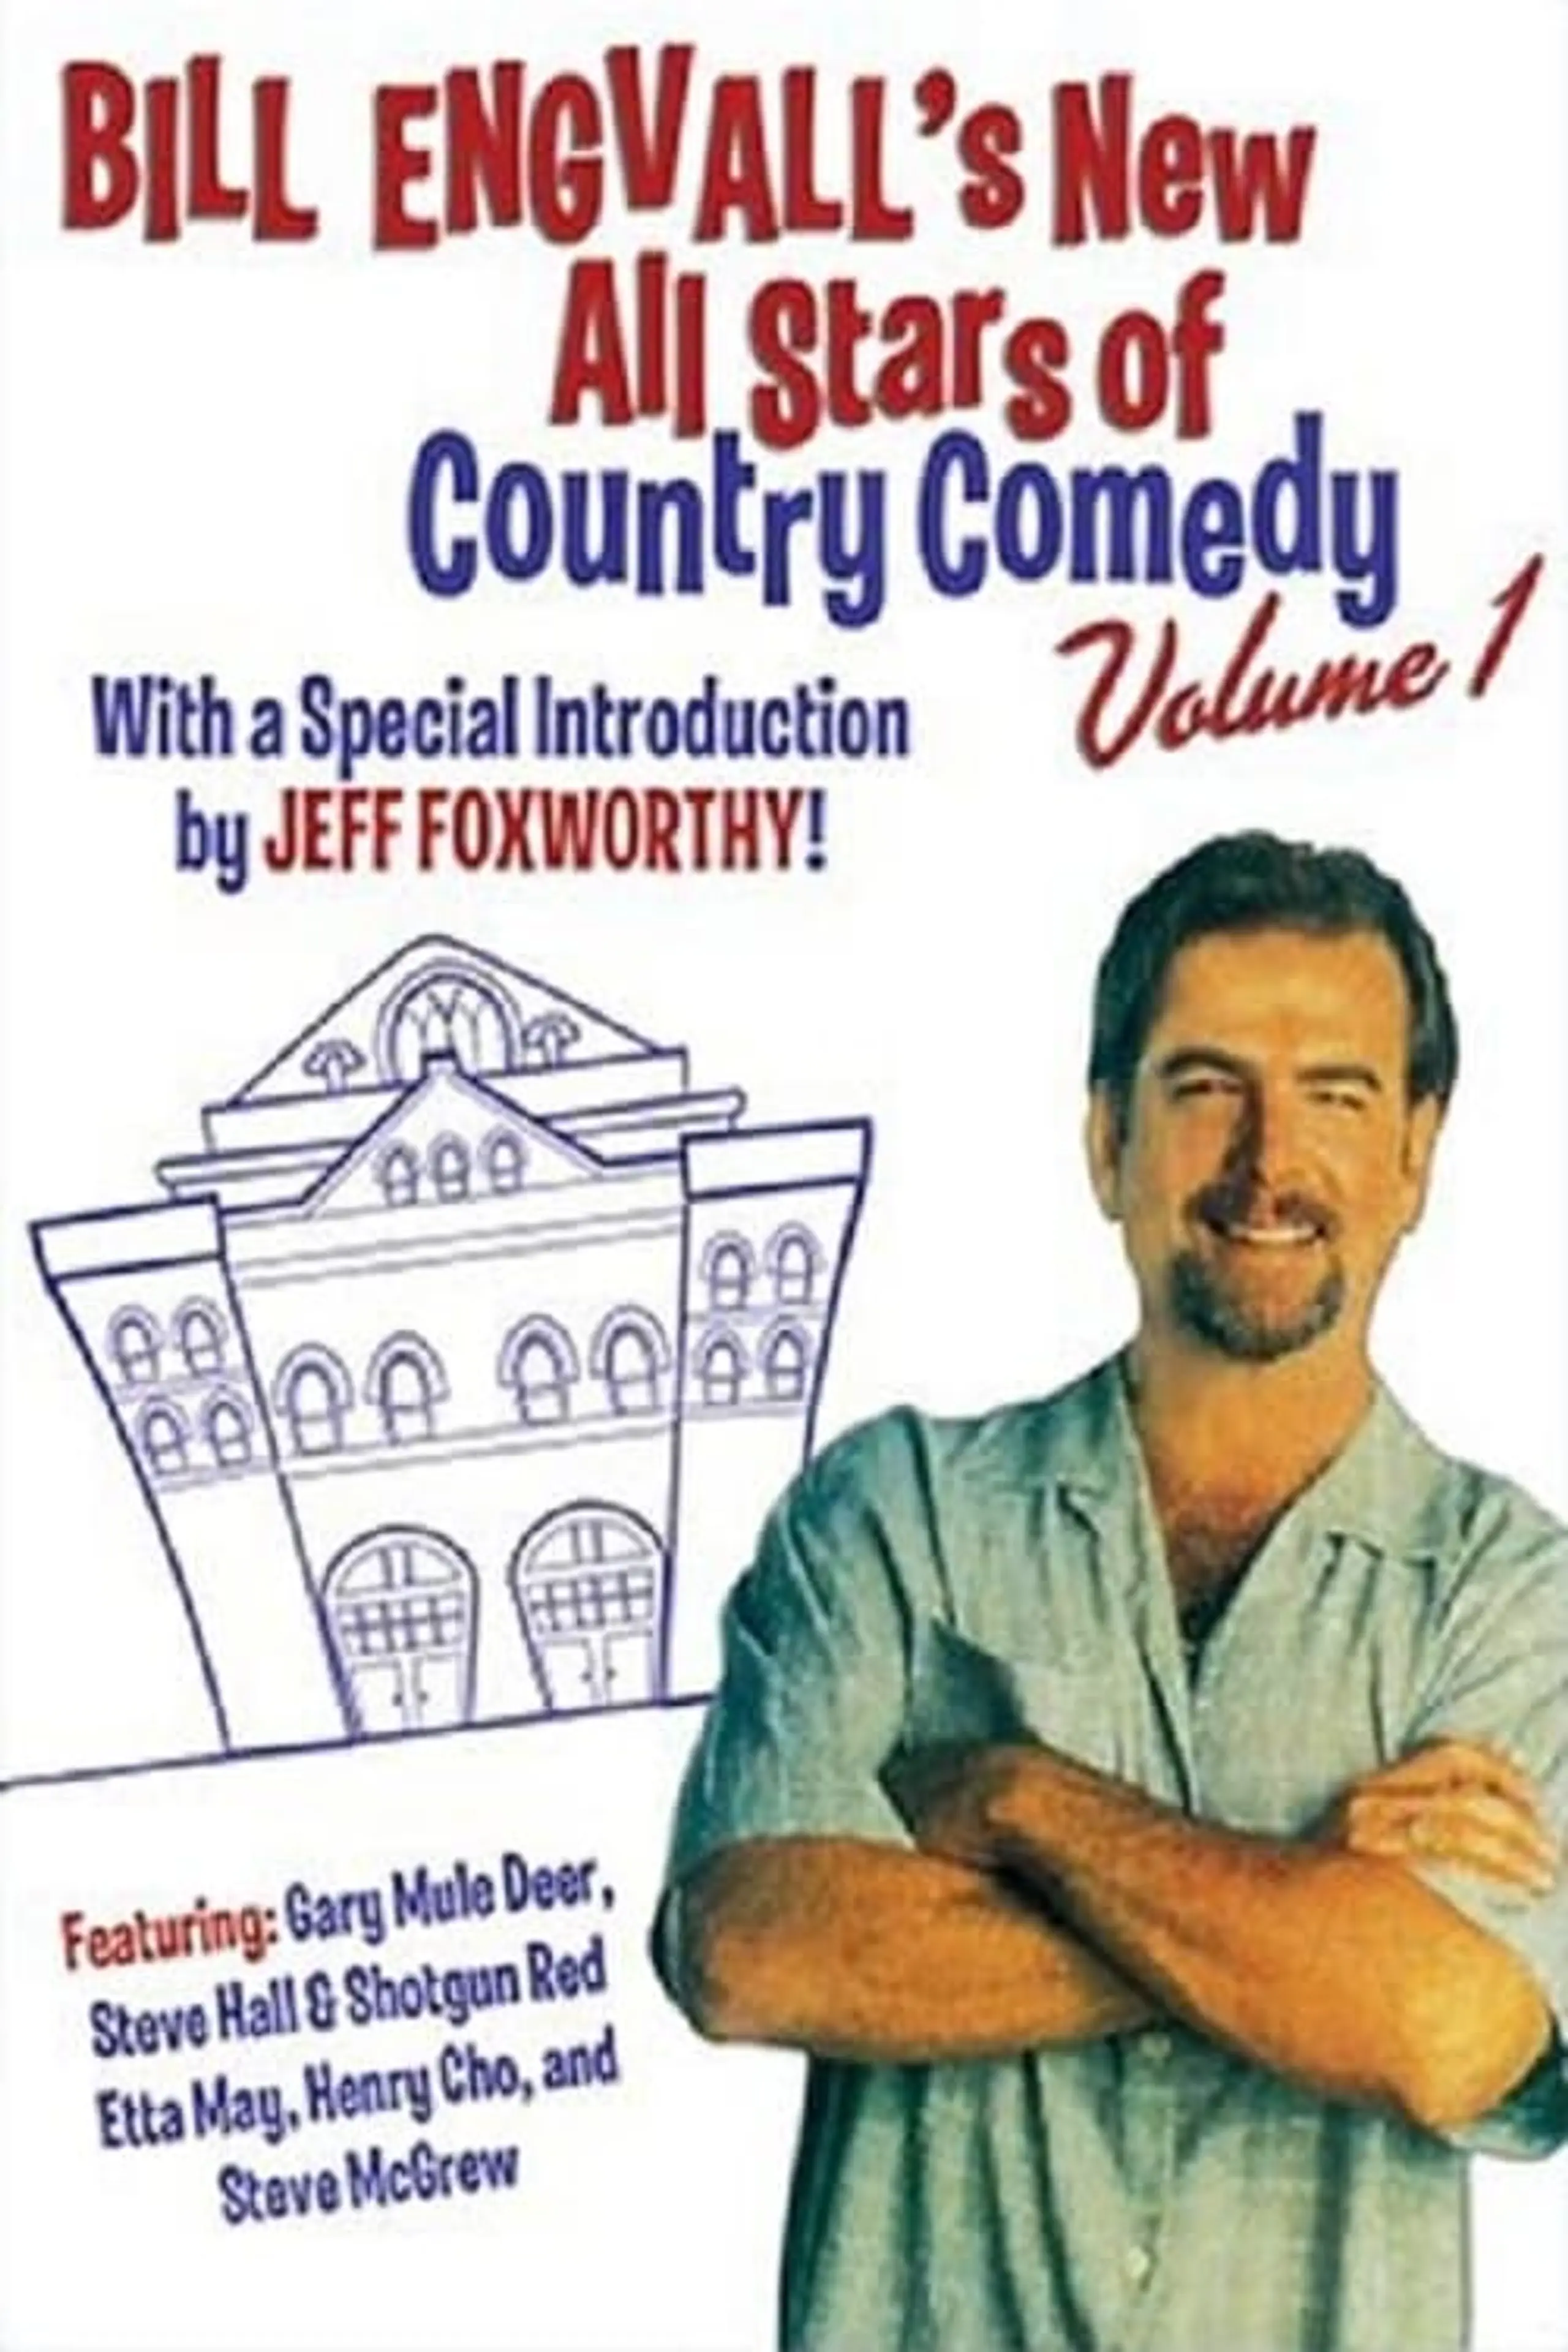 Bill Engvall's New All Stars of Country Comedy: Volume 1